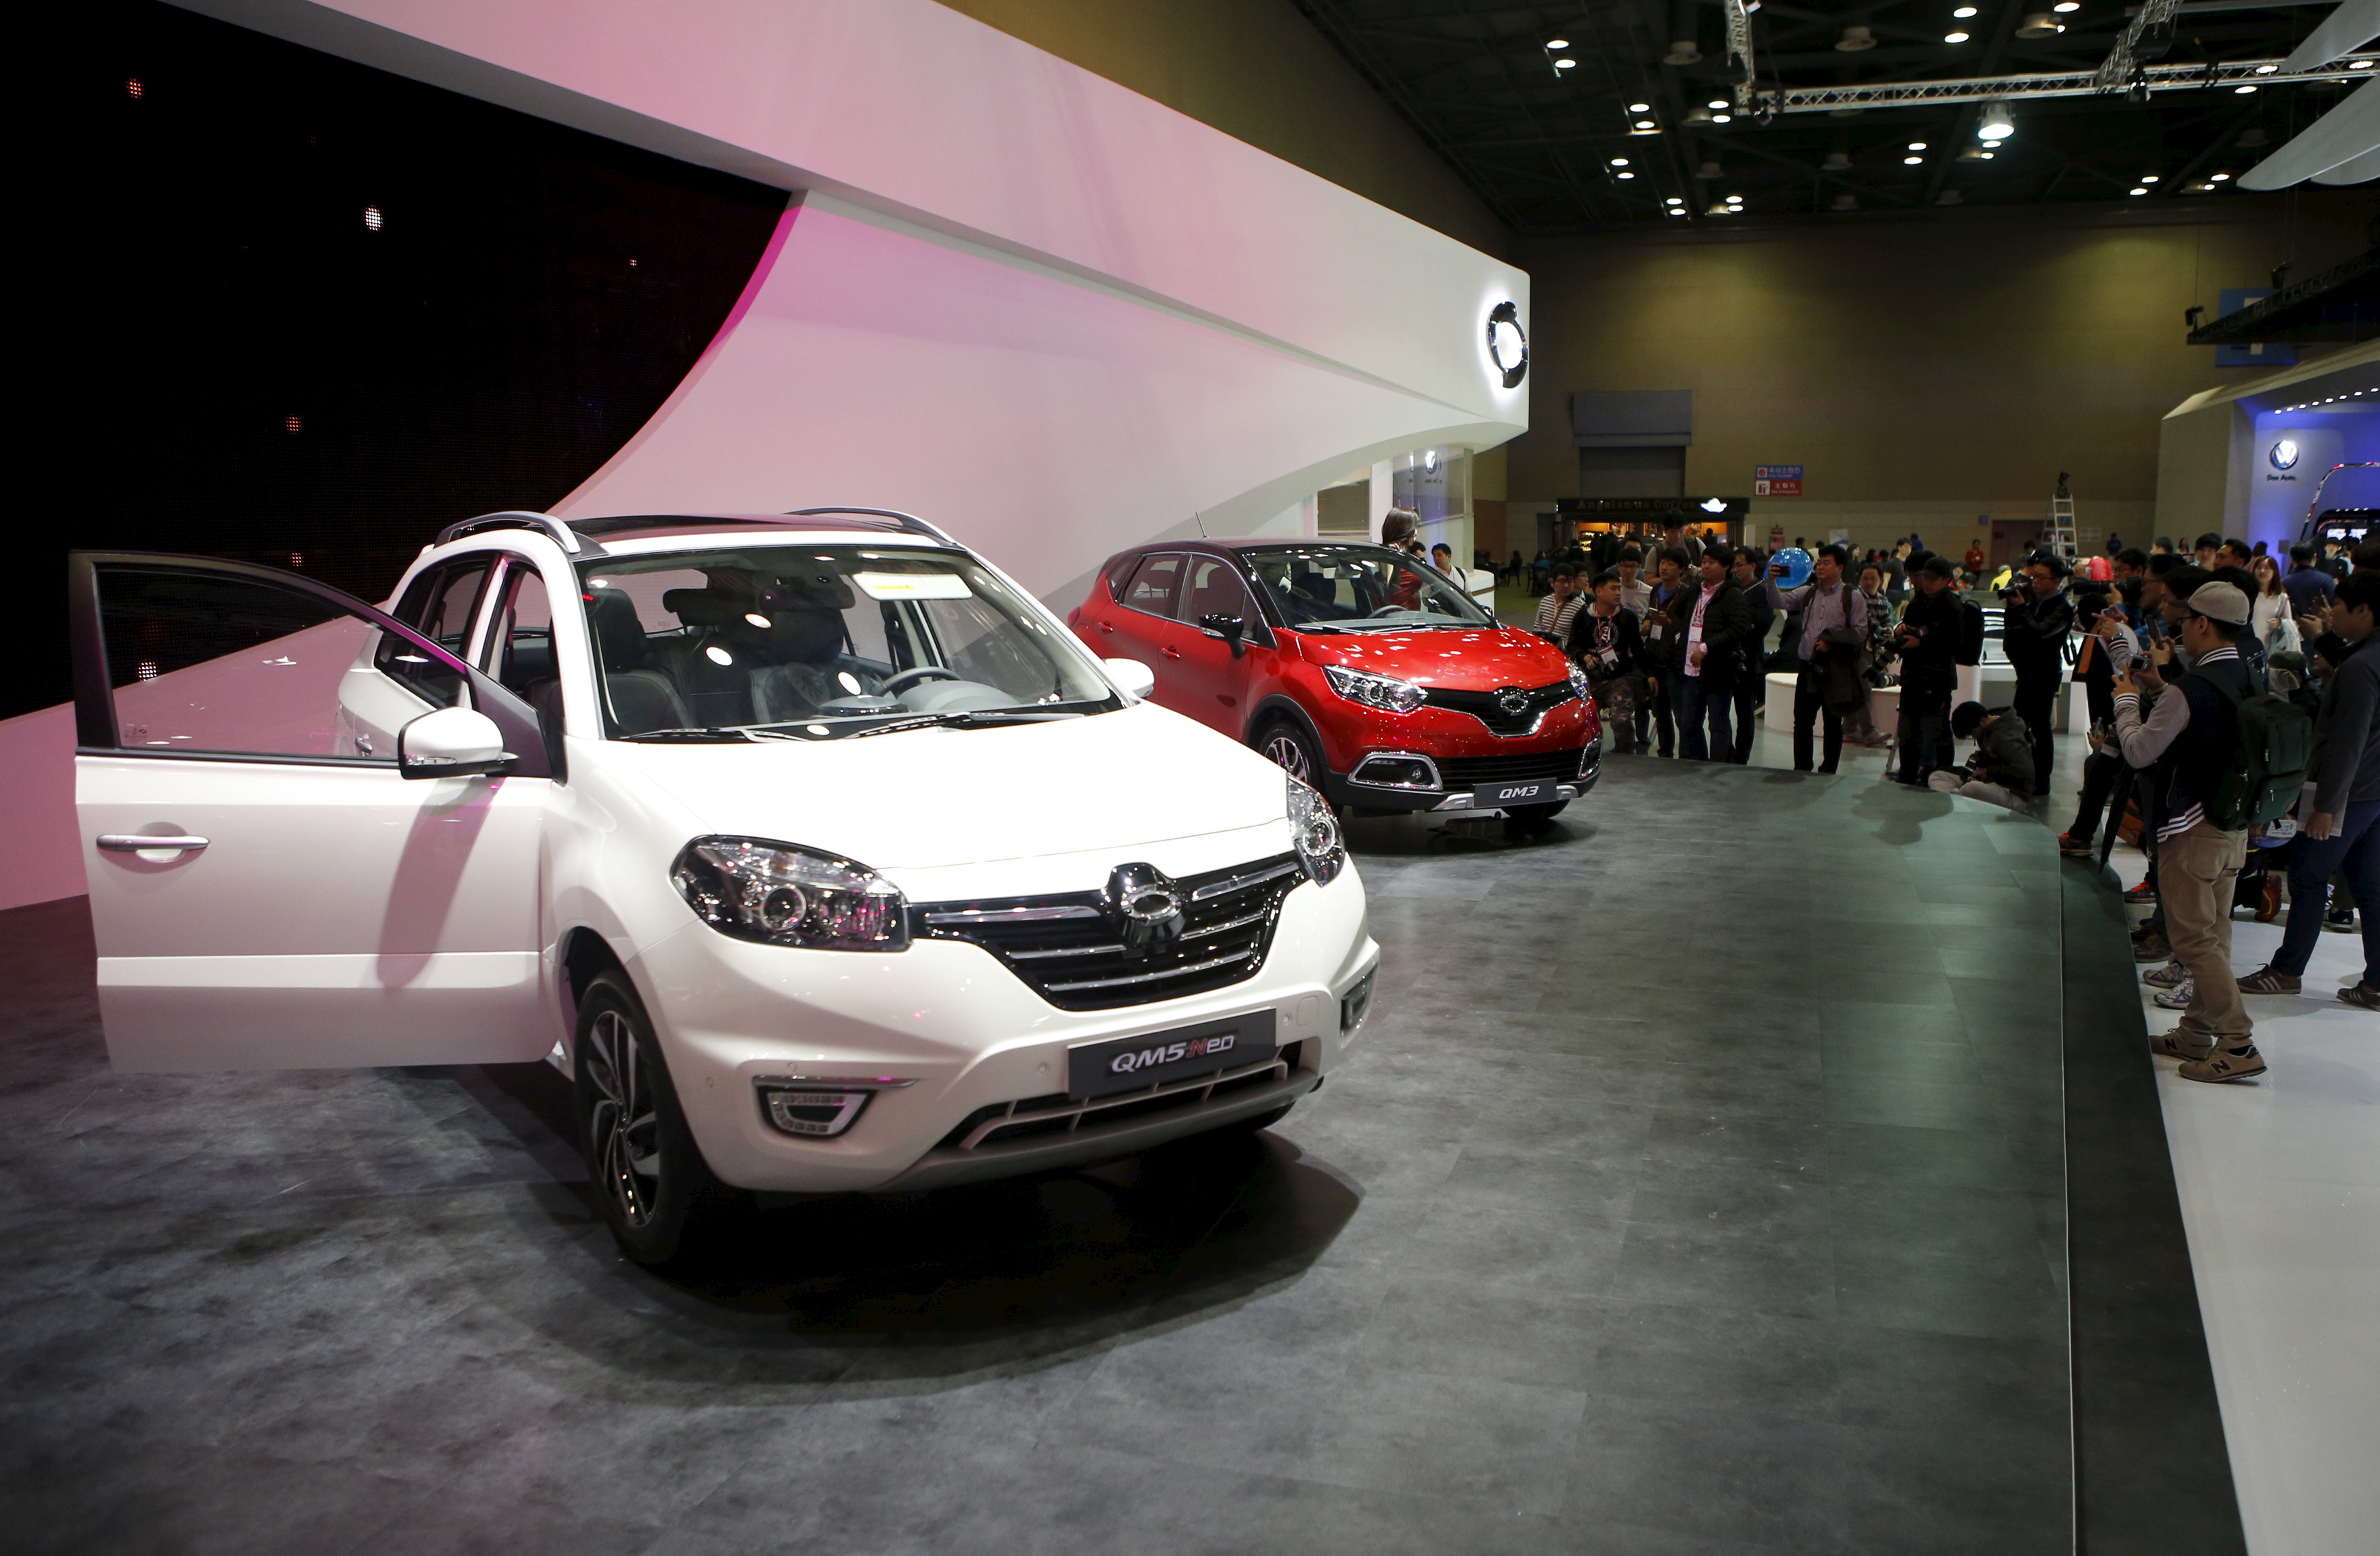 Renault Samsung QM5 is seen as visitors and photographers gather to take photographs of a model posing next to a Renault Samsung QM3 at the Seoul Motor Show 2015